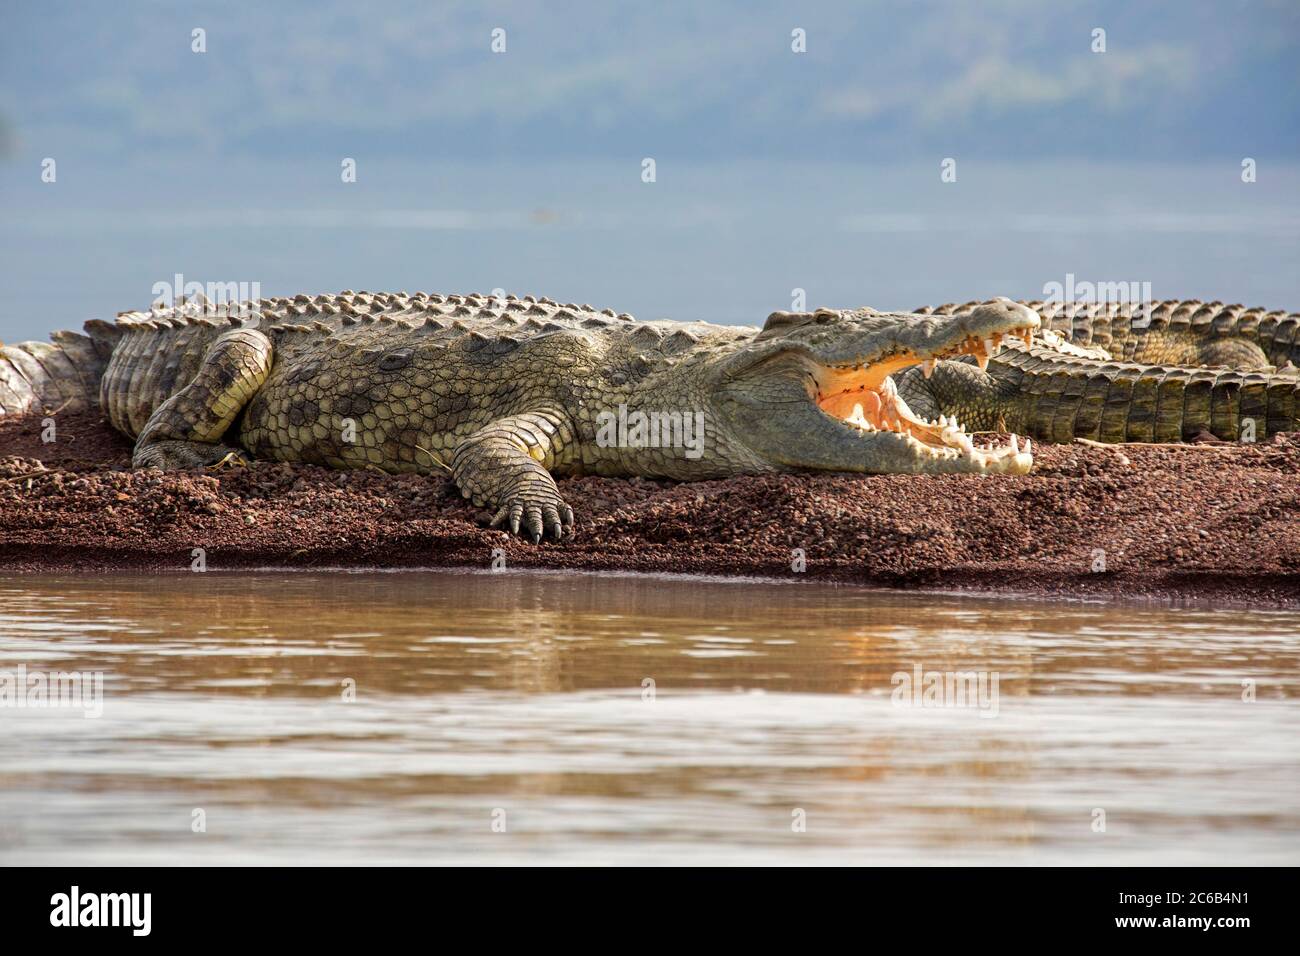 Nile crocodiles (Crocodylus niloticus) at Lake Chamo / Chamo Hayk in Southern Nations, Nationalities and Peoples' Region of southern Ethiopia, Africa Stock Photo